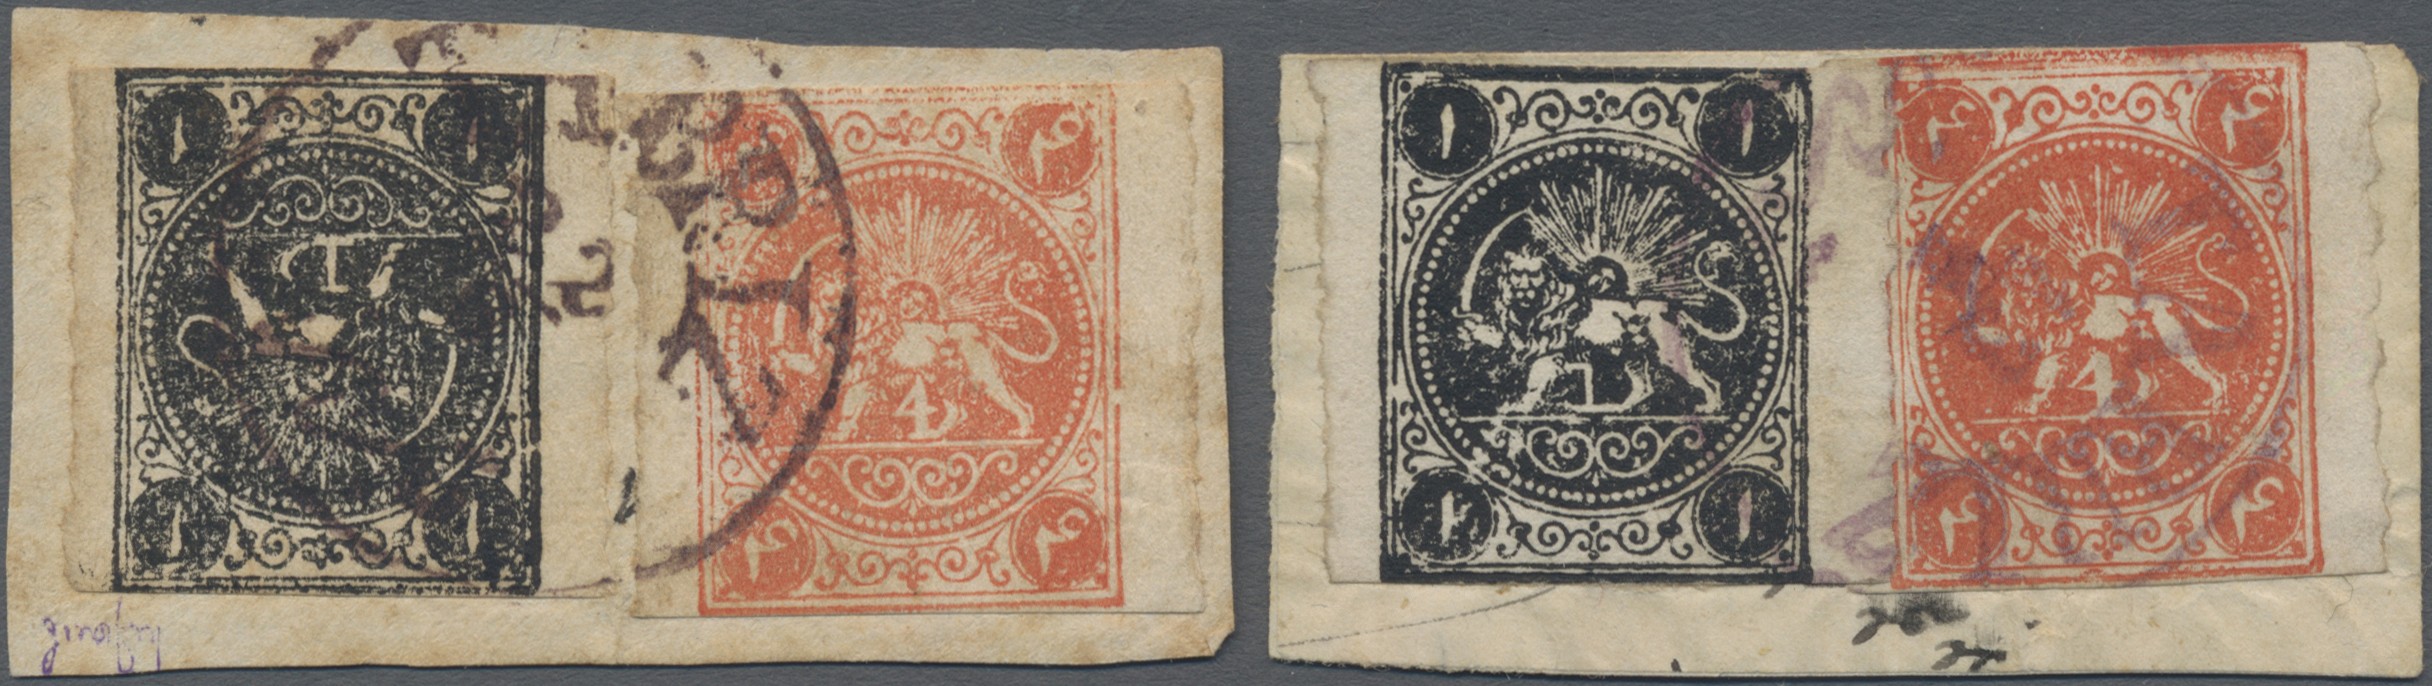 Lot 00491 - iran  -  Auktionshaus Christoph Gärtner GmbH & Co. KG 53rd AUCTION - Day 1 Asia (inkl China) and Thematics